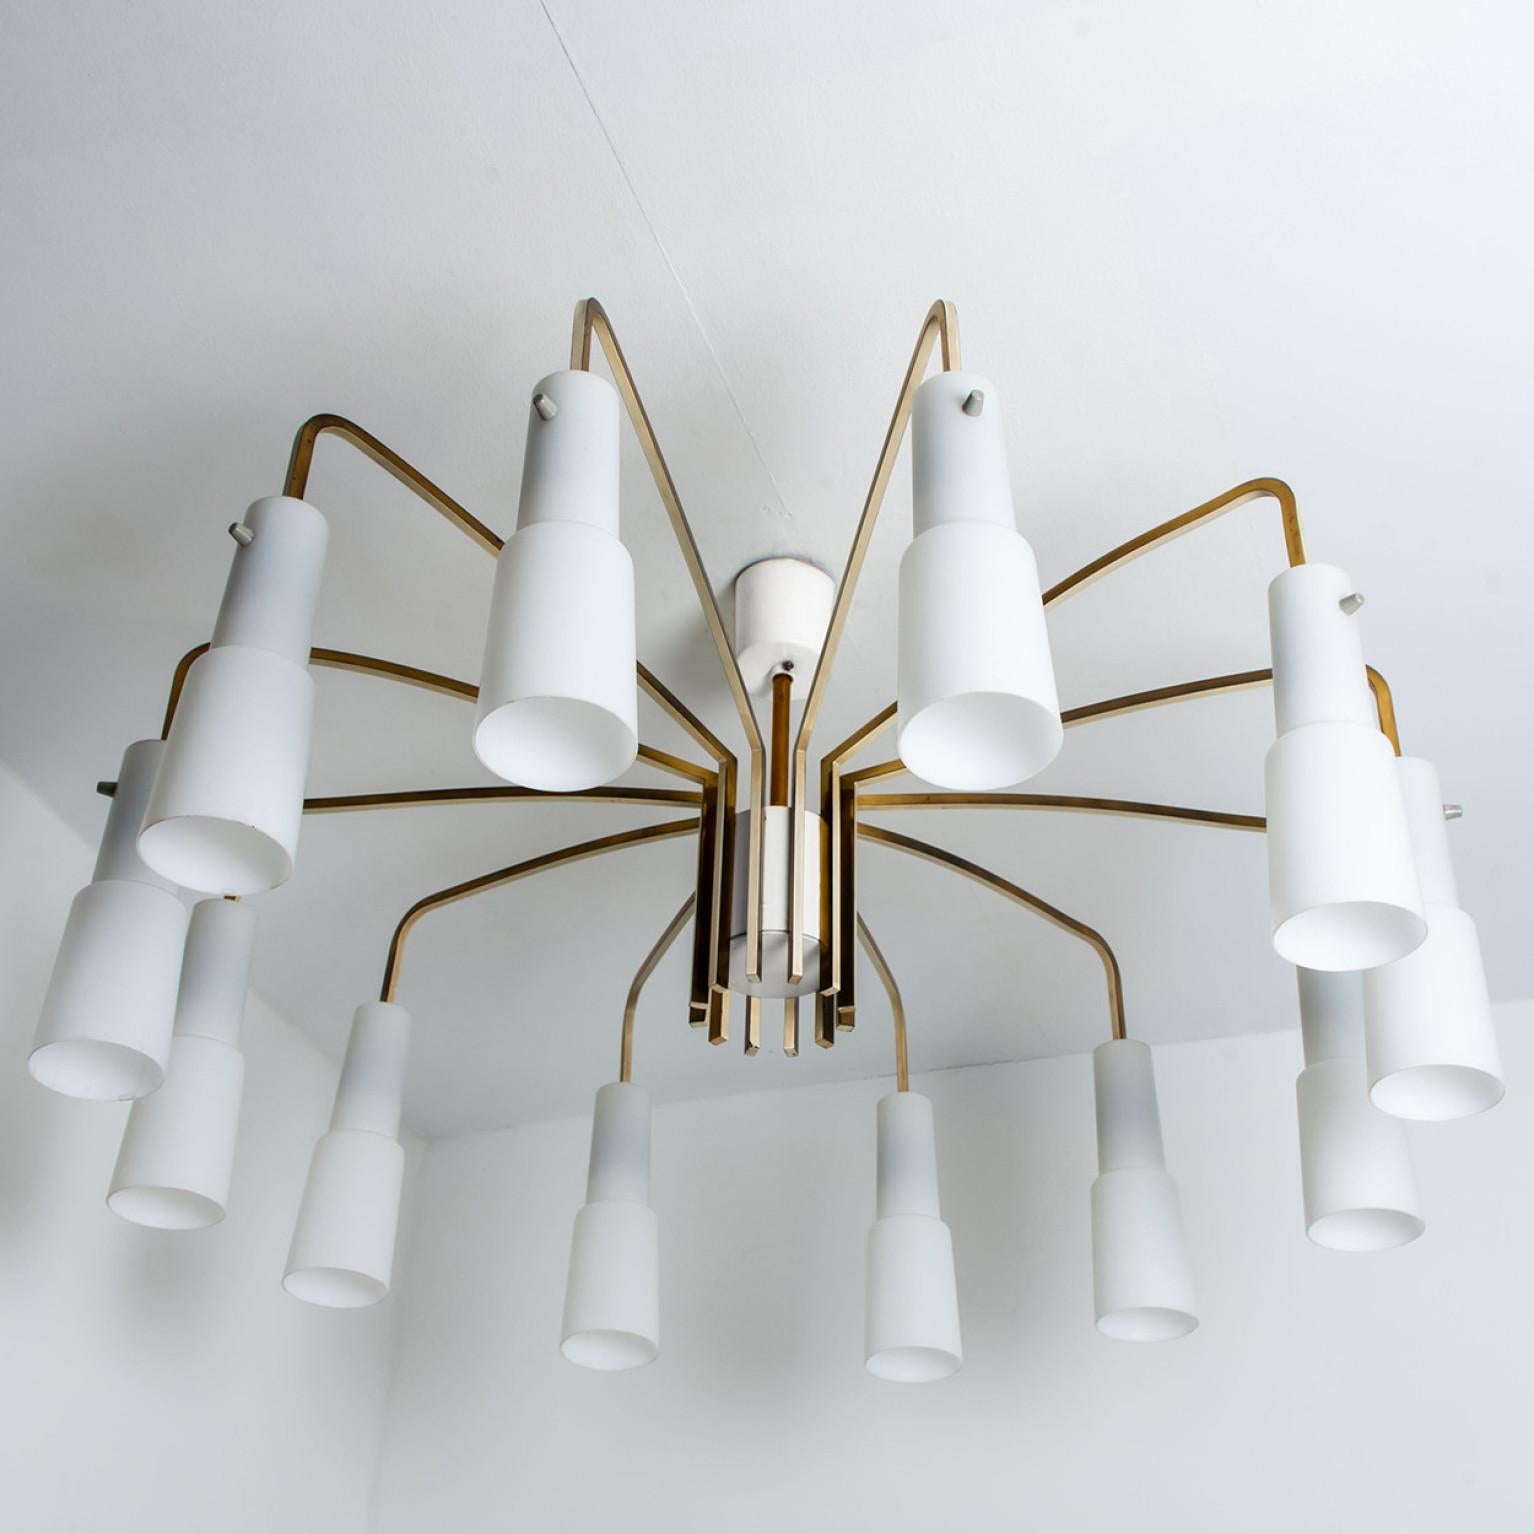 Impressive flush mount, designed and made by the company Hillebrand. The white milkglass shades are fixed on 12 brass 'arms'. Which makes it look like a spider shape.
Illuminates beautifully.

The flush mount is cleaned, well-wired and ready to use.